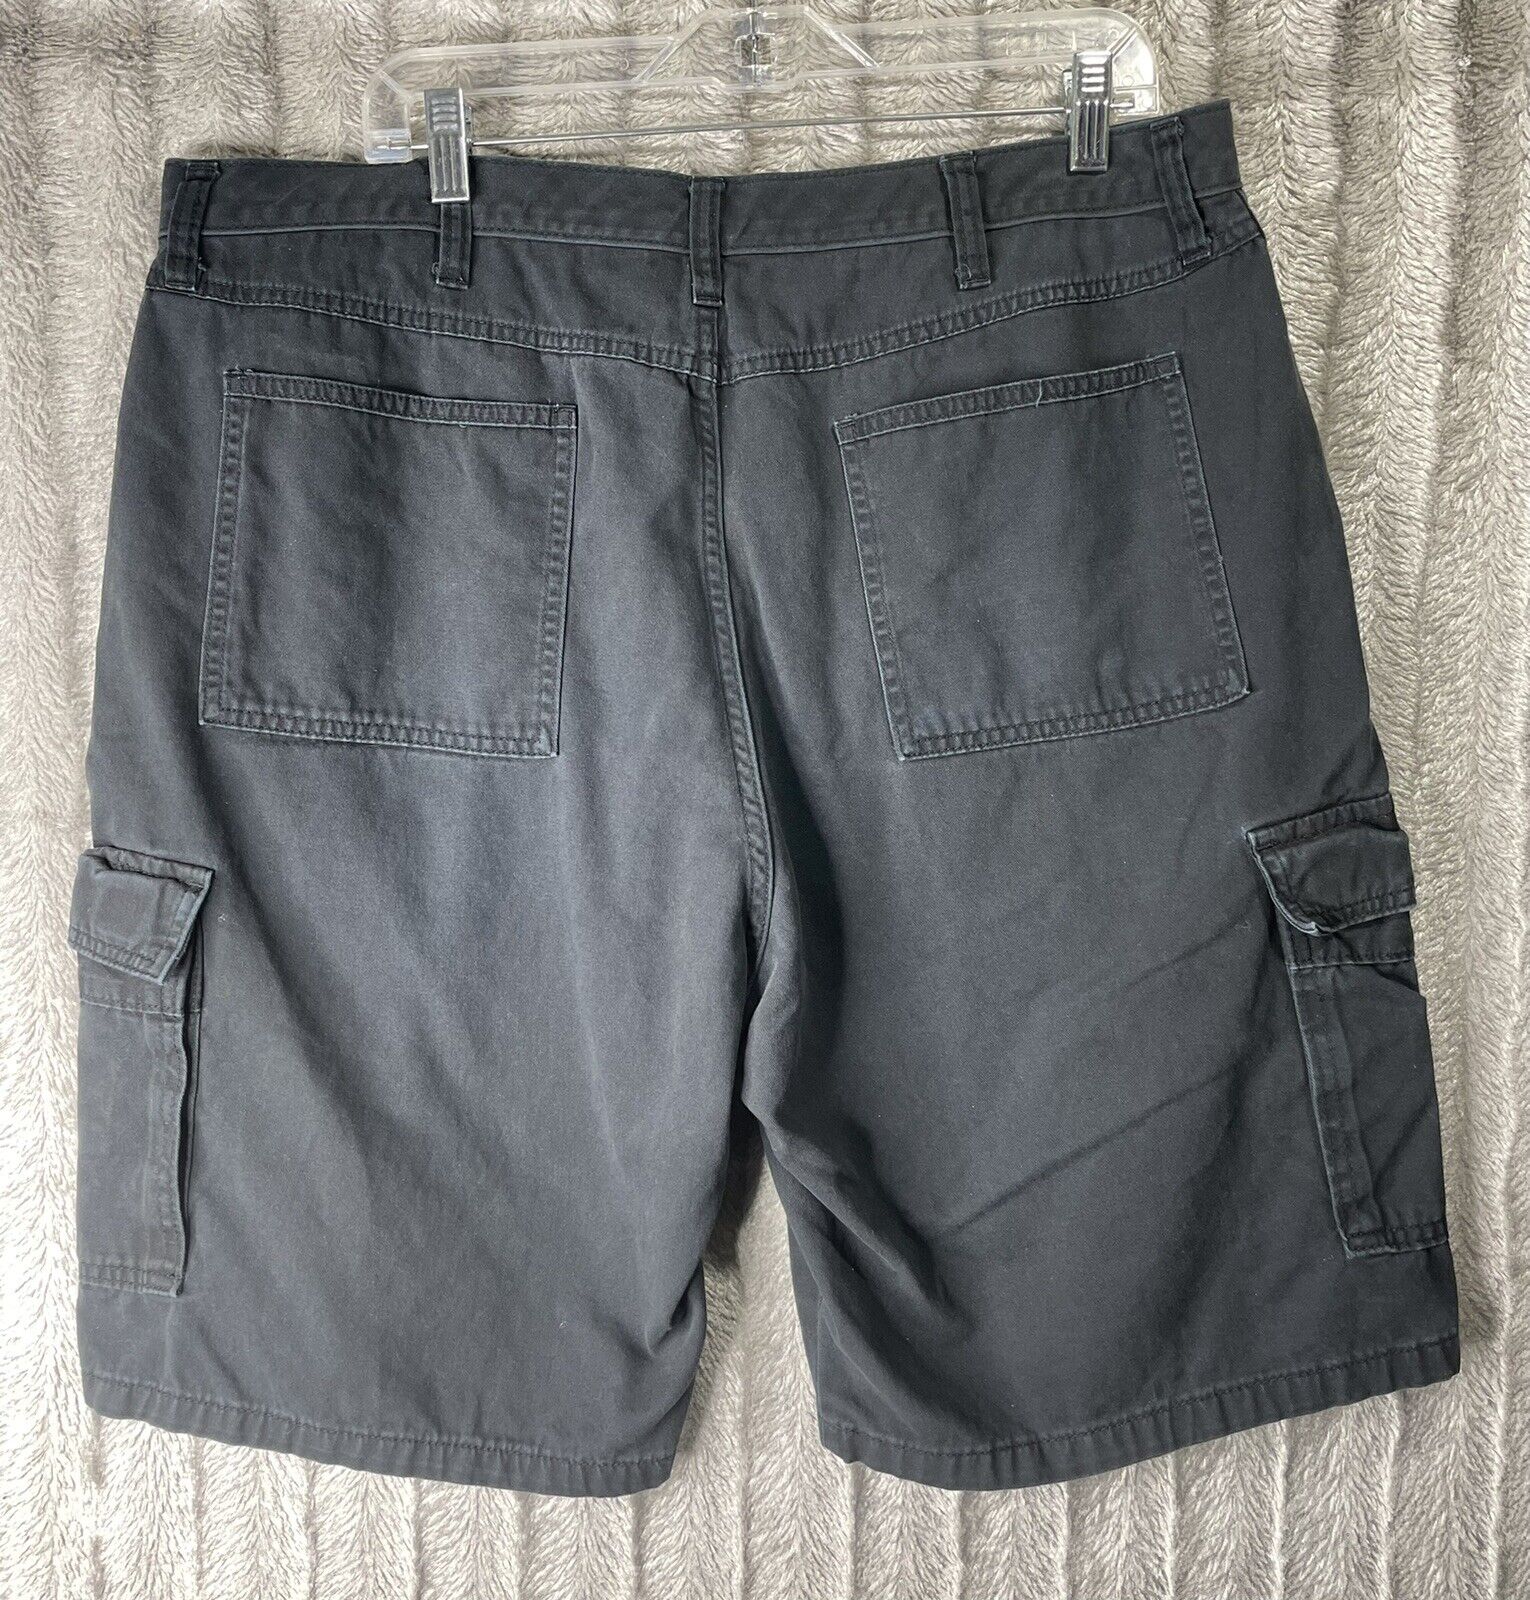 Authentic Issue wrangler real comfortable jeans Mens cargo shorts black ...